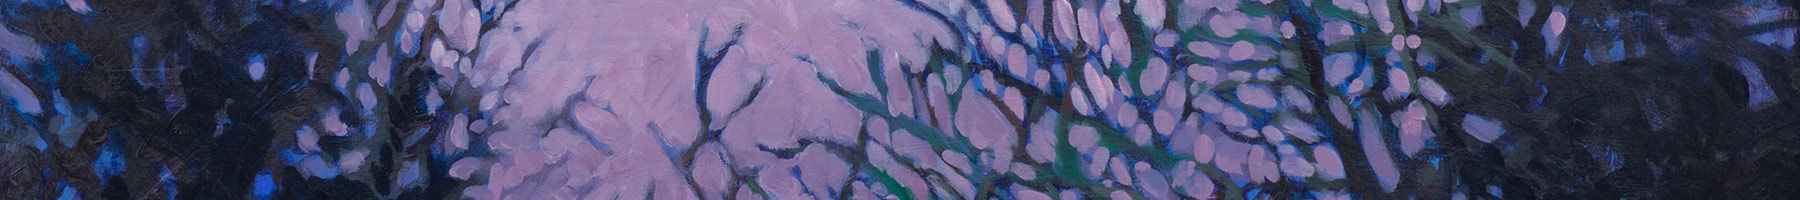 painting of branches against a lavender sky